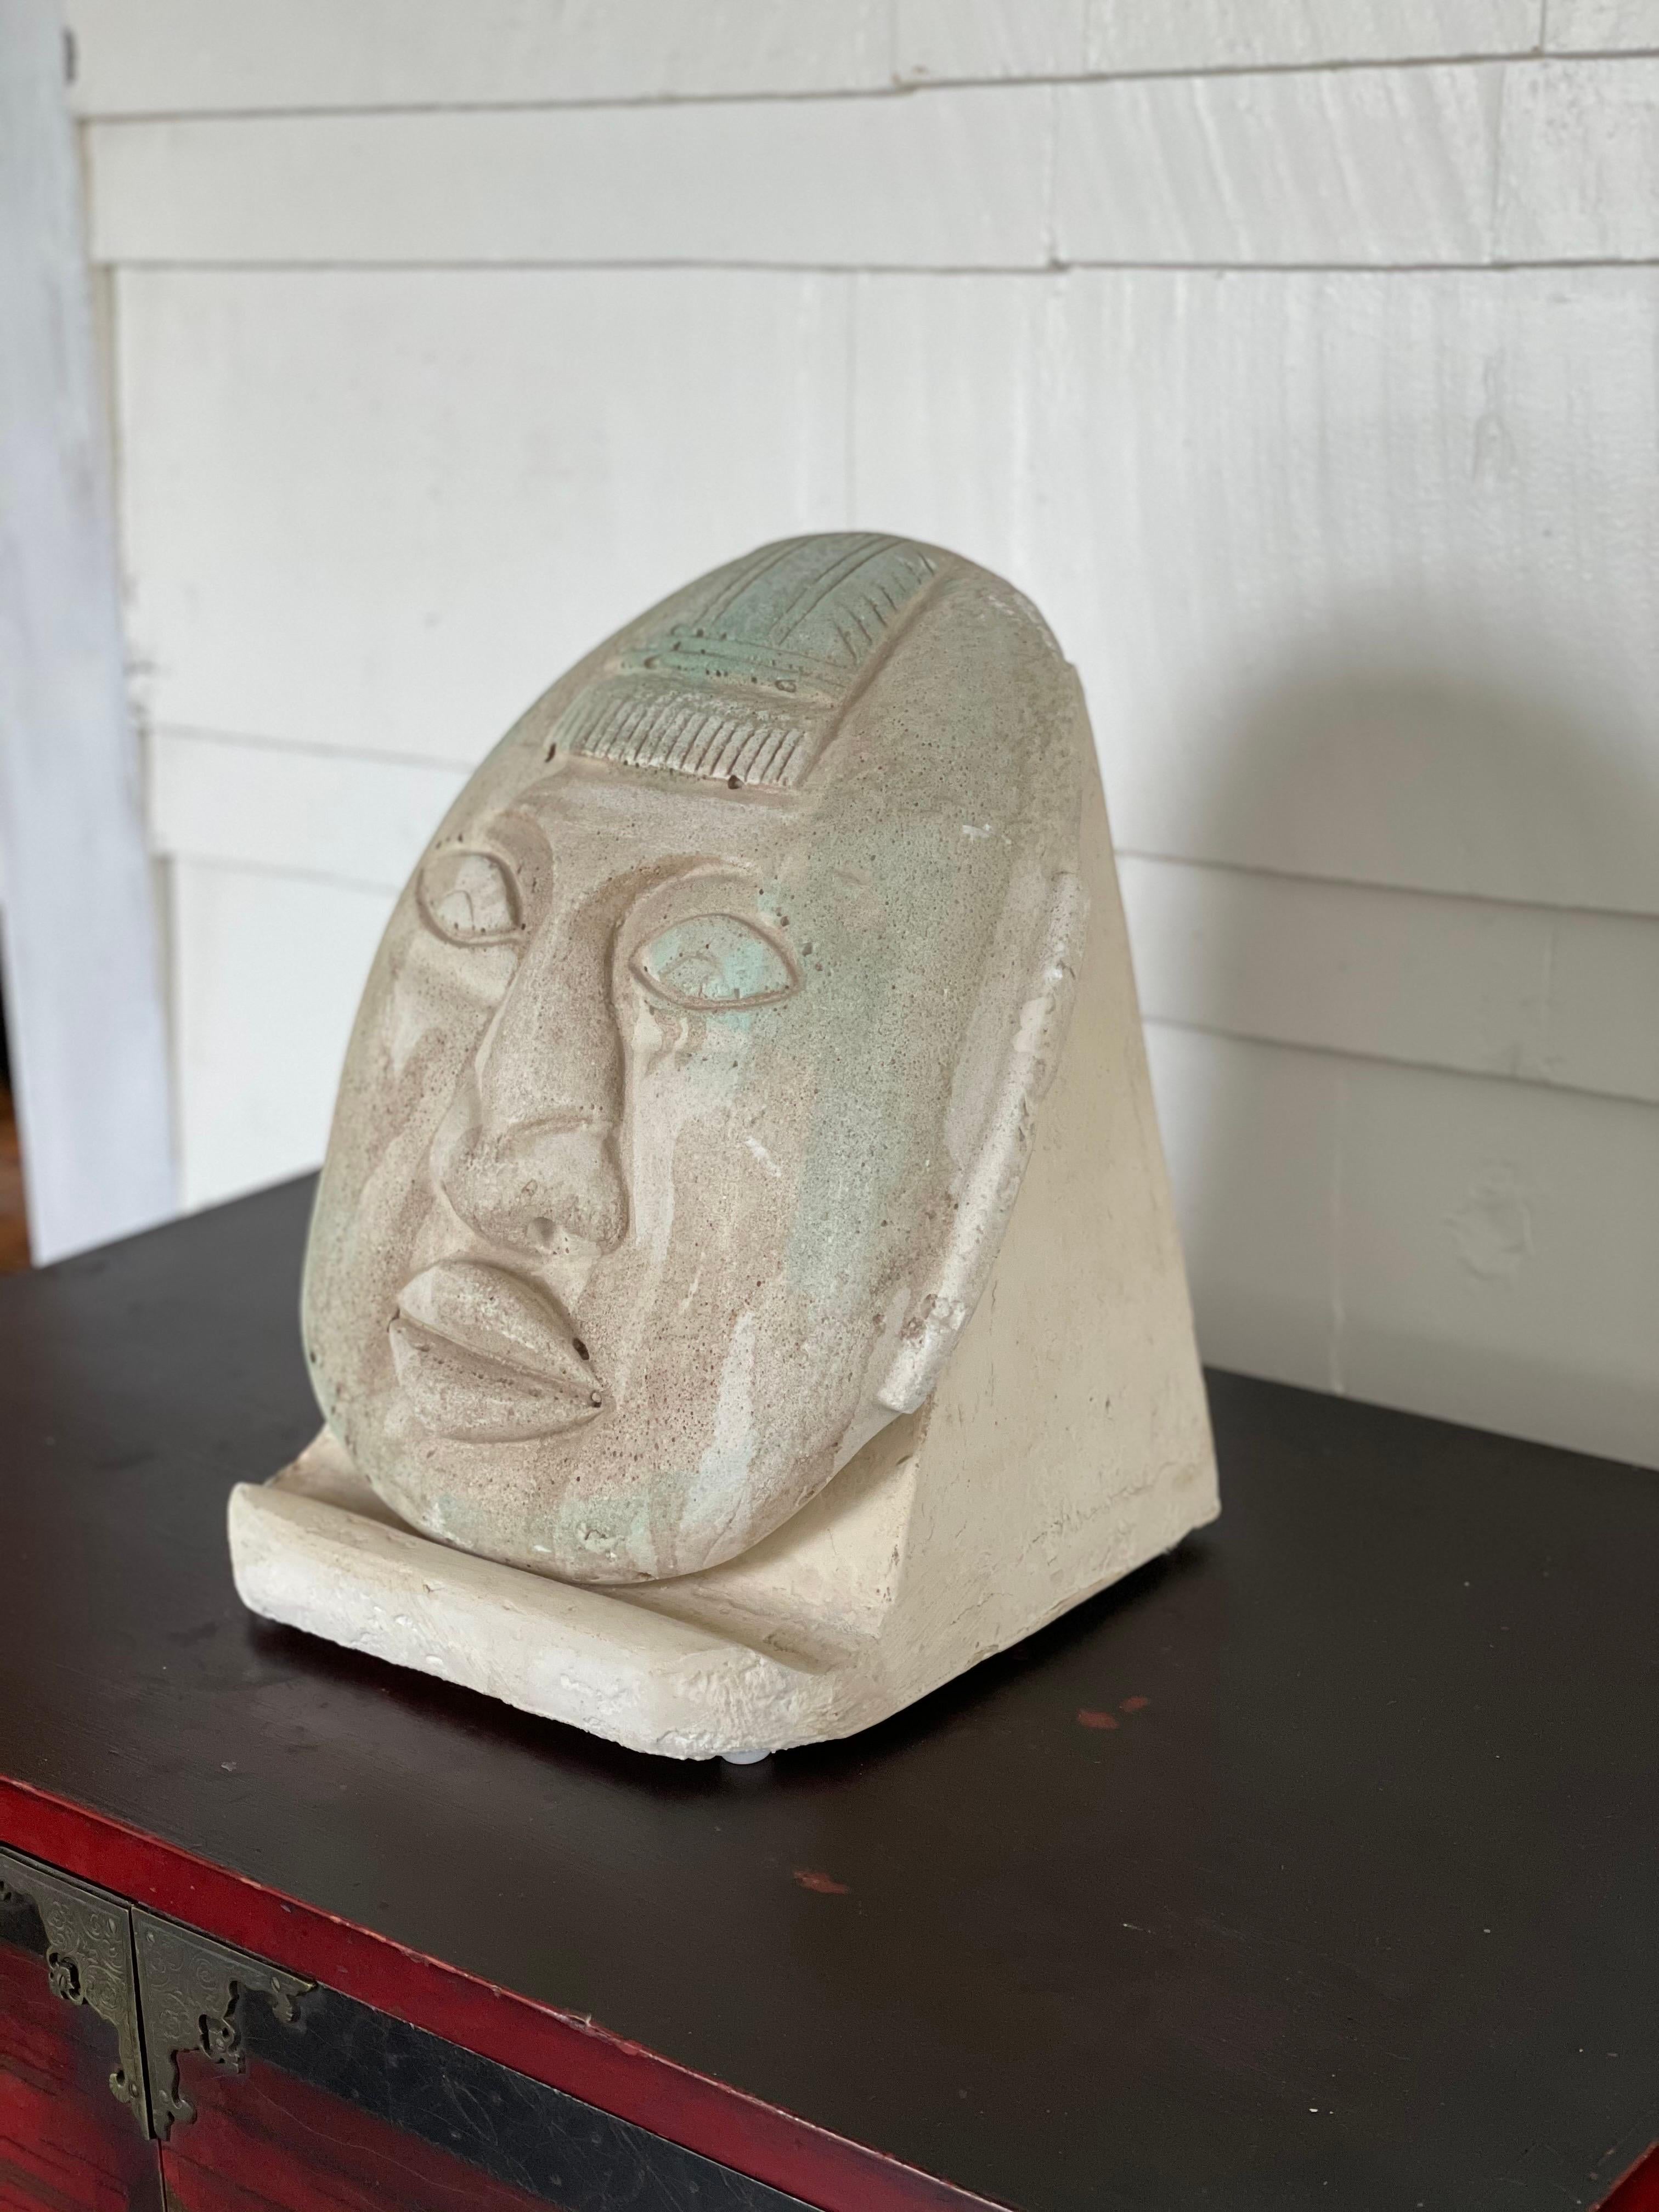 Unique postmodern plaster face sculpture with stand. Mayan or Buddha design. Great period piece and colors.